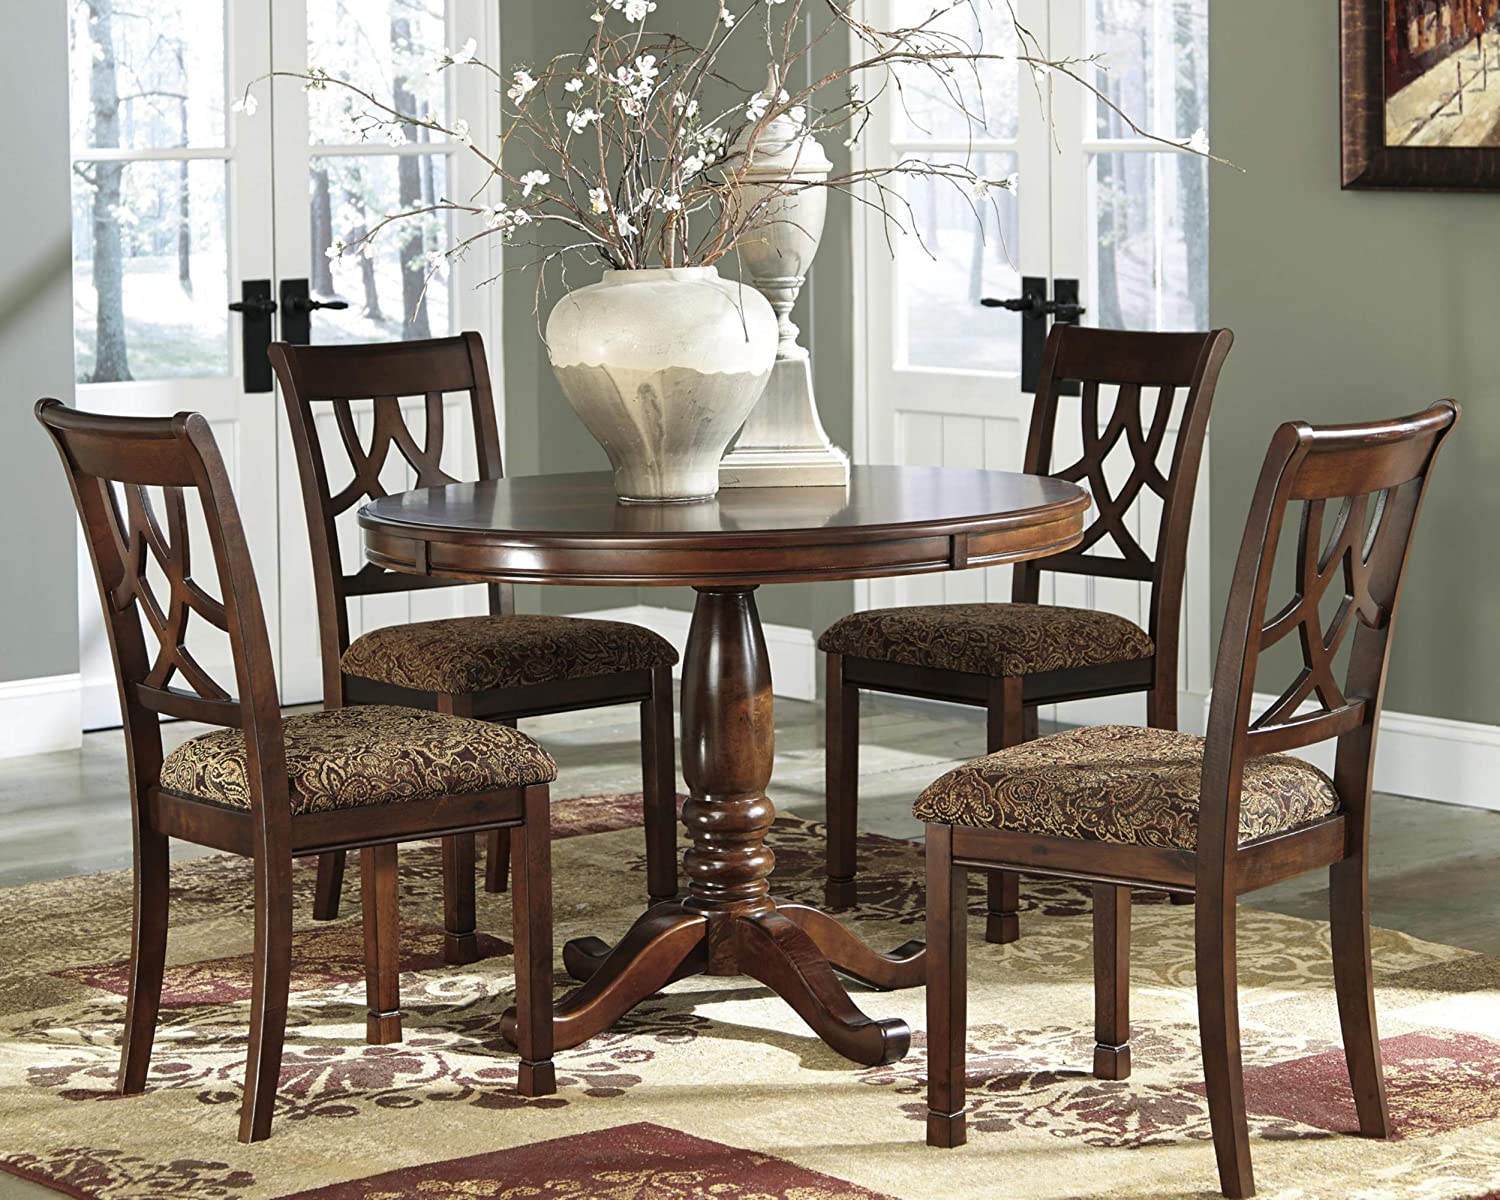 Buy Wooden 6 seater dining table in India